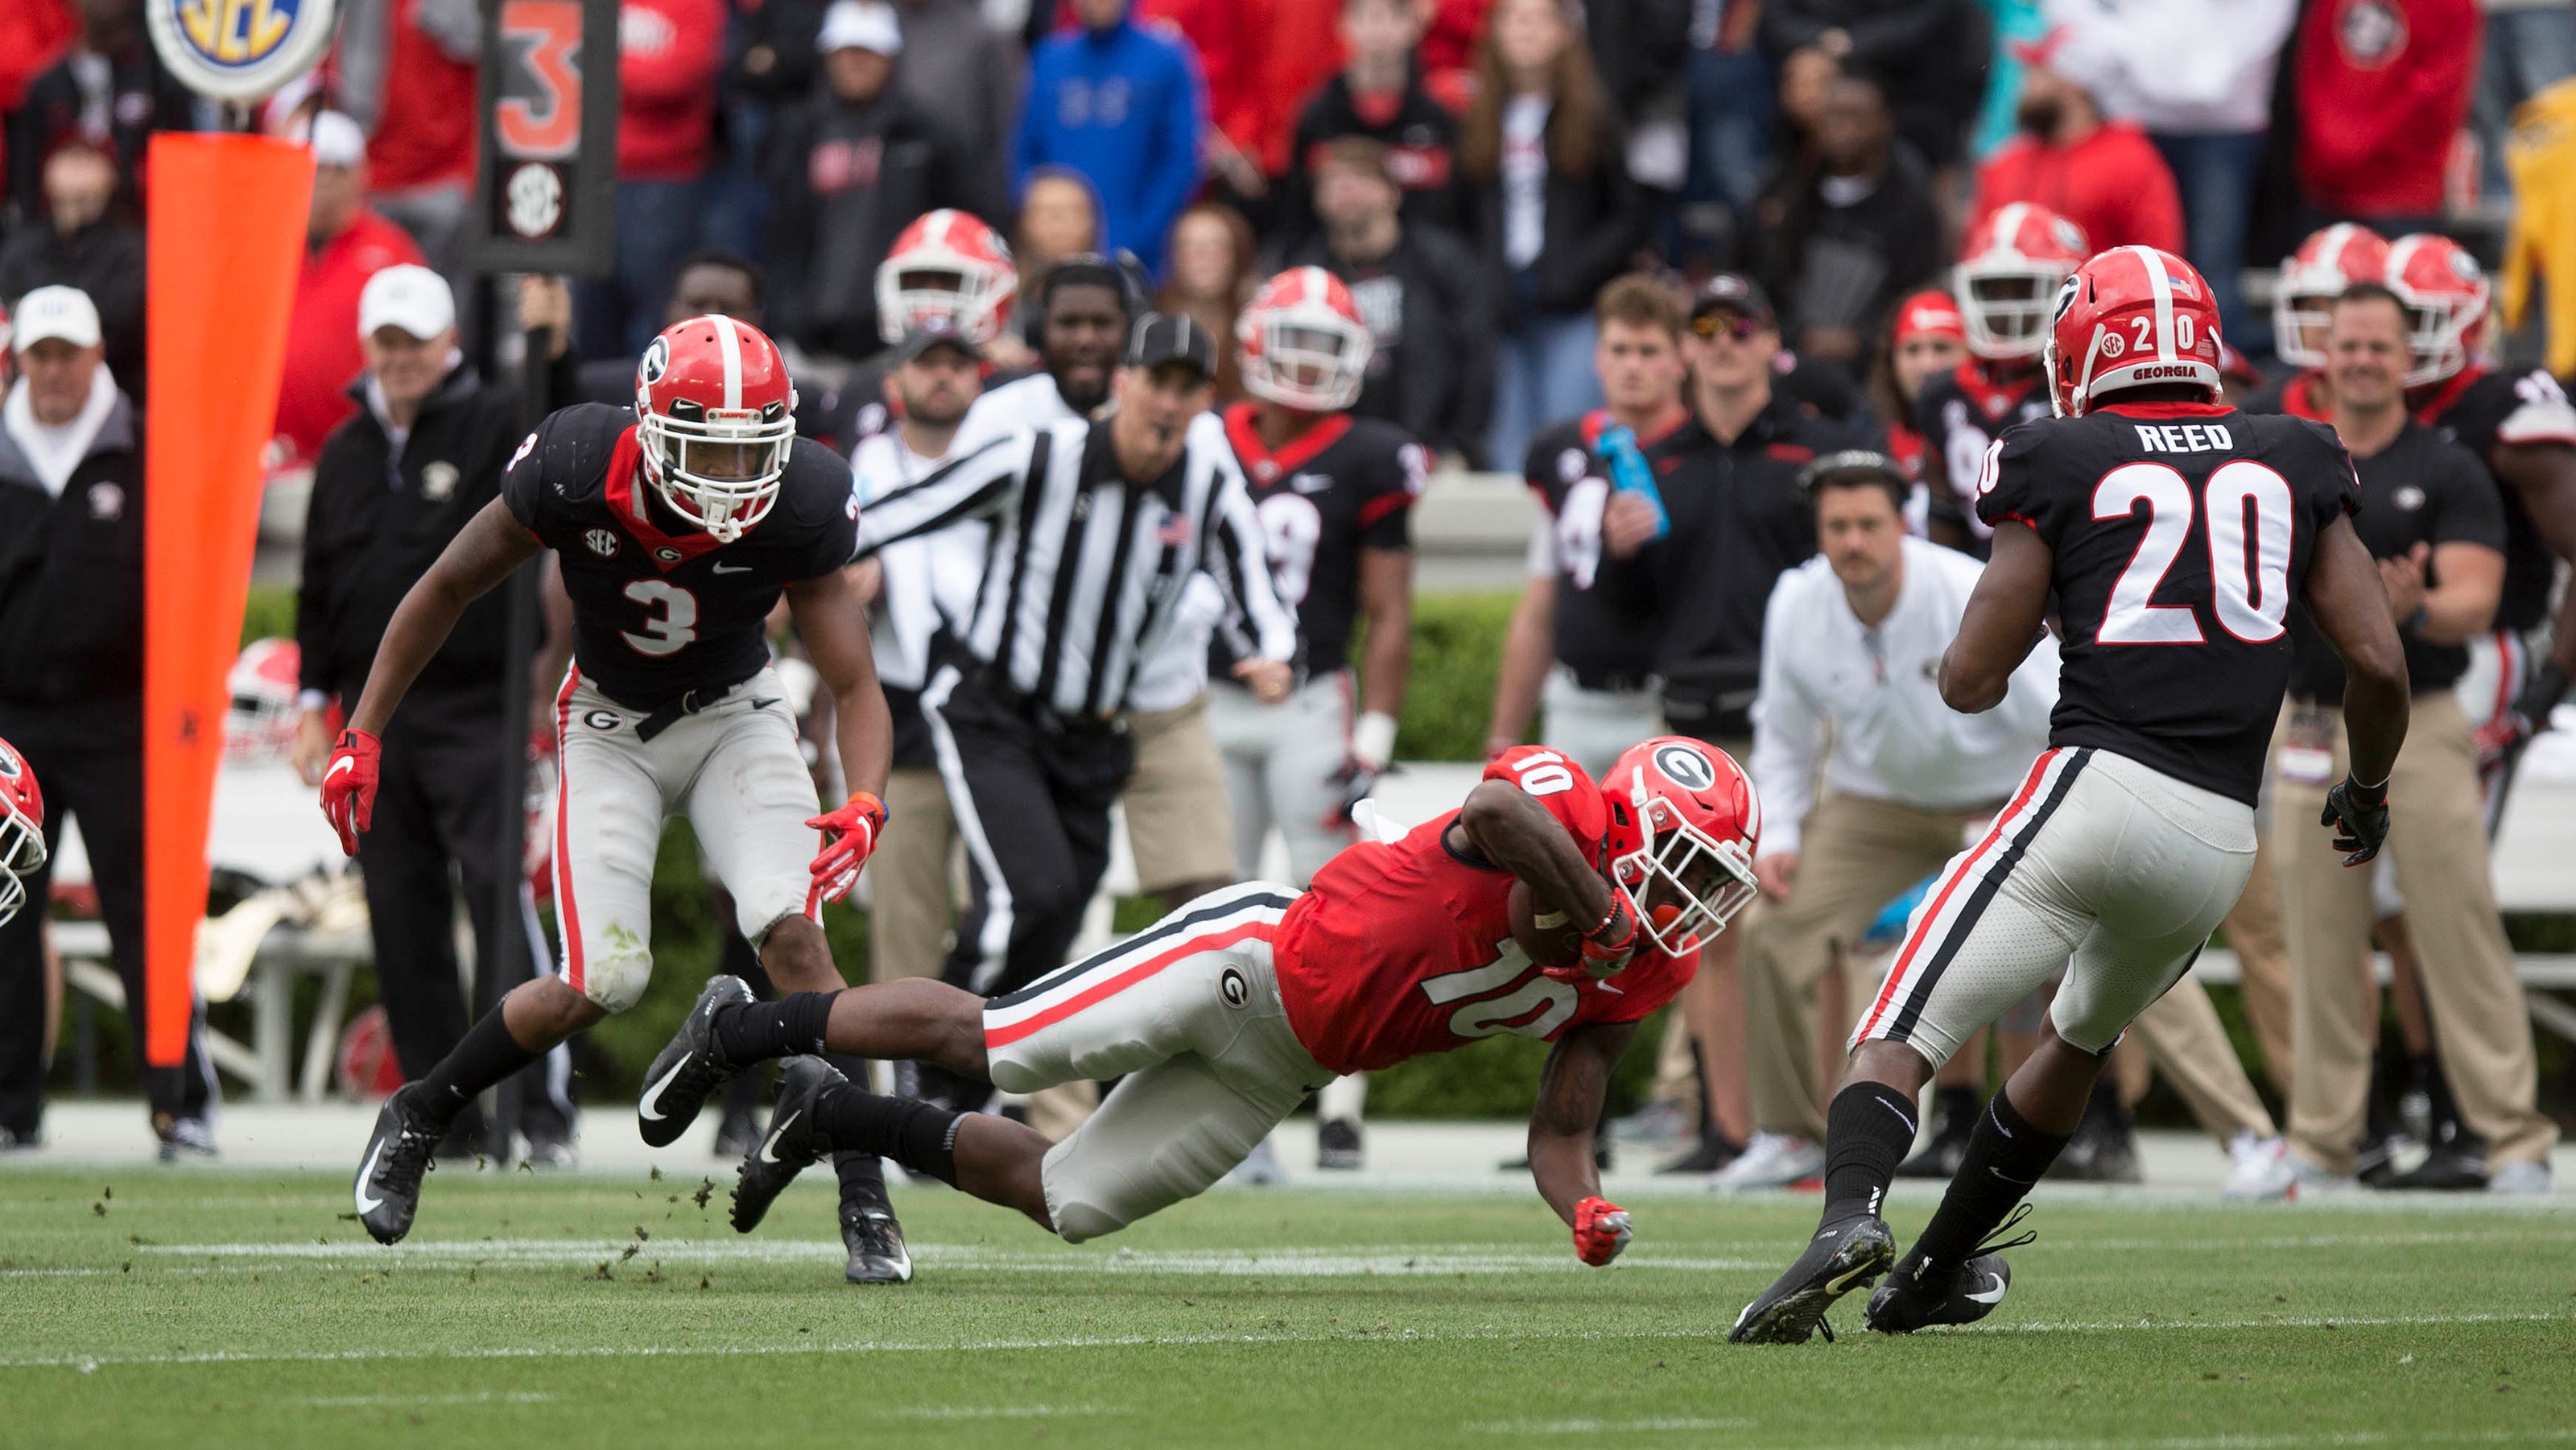 UGA football GDay tickets went on sale to public, but were gone quickly